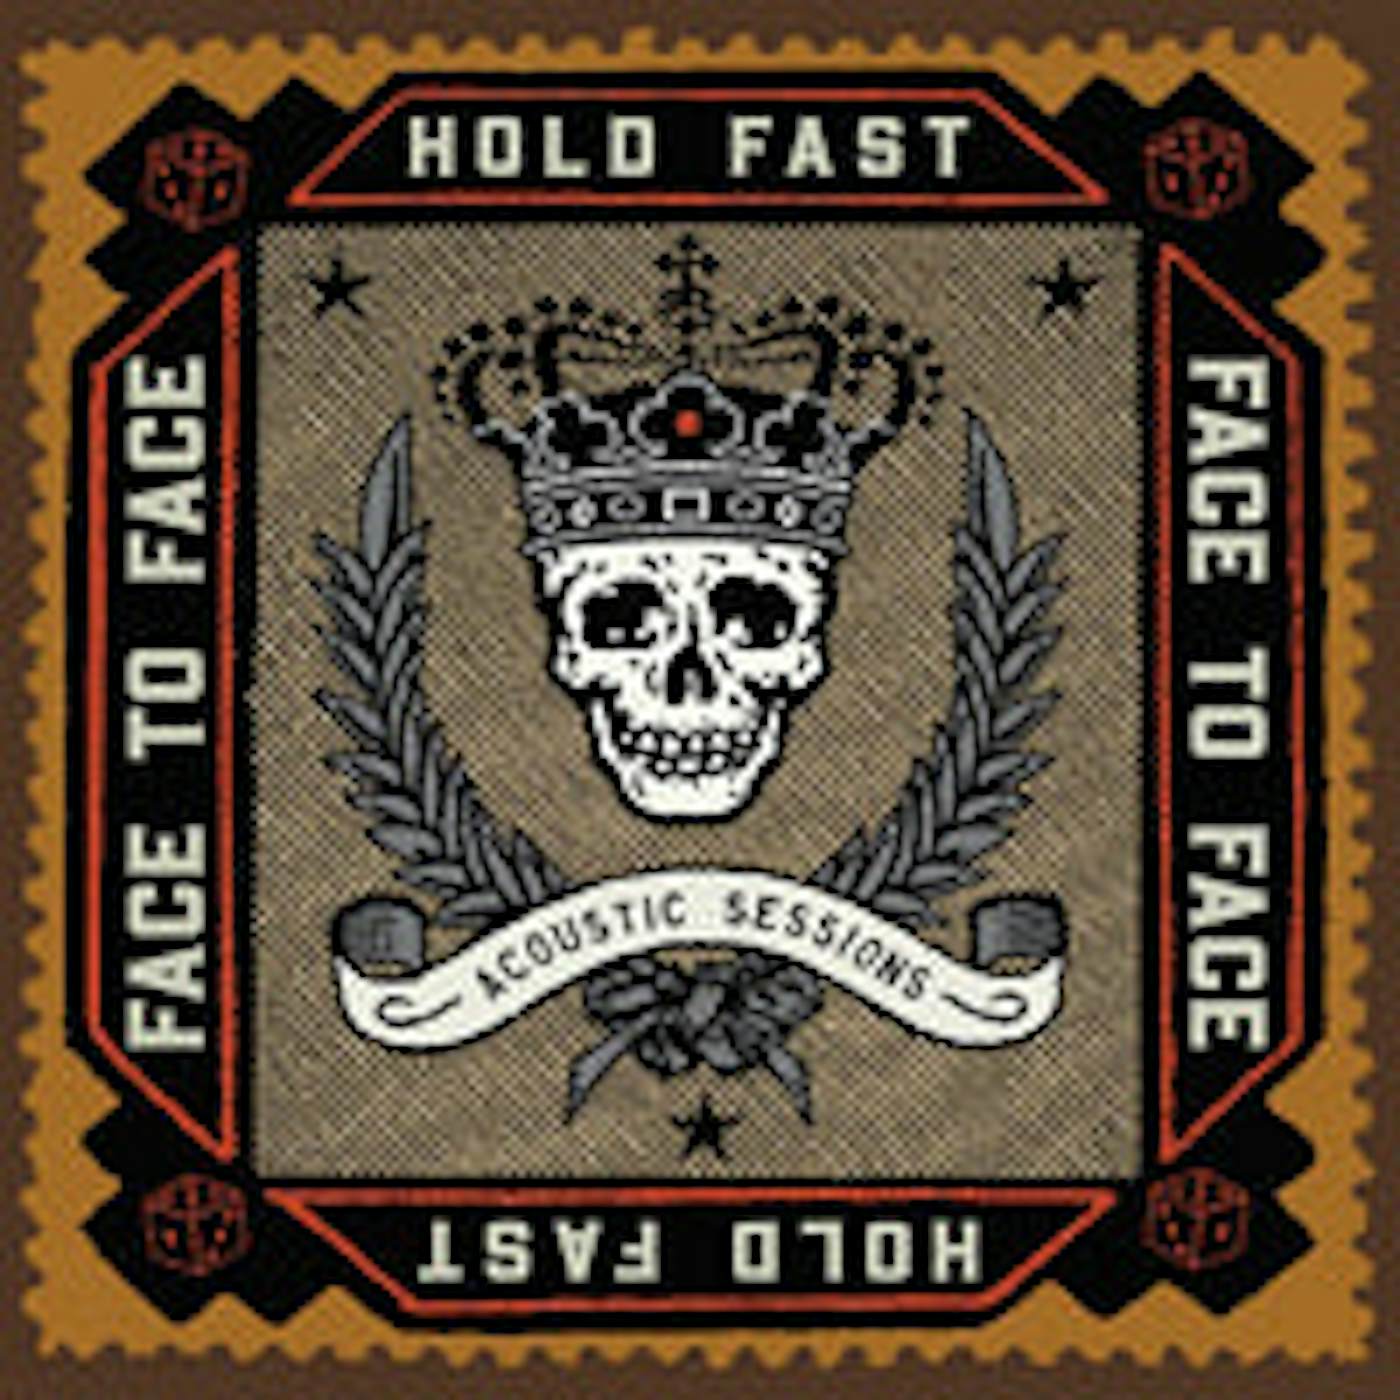 Face To Face LP - Hold Fast (Acoustic Sessions) (Vinyl)